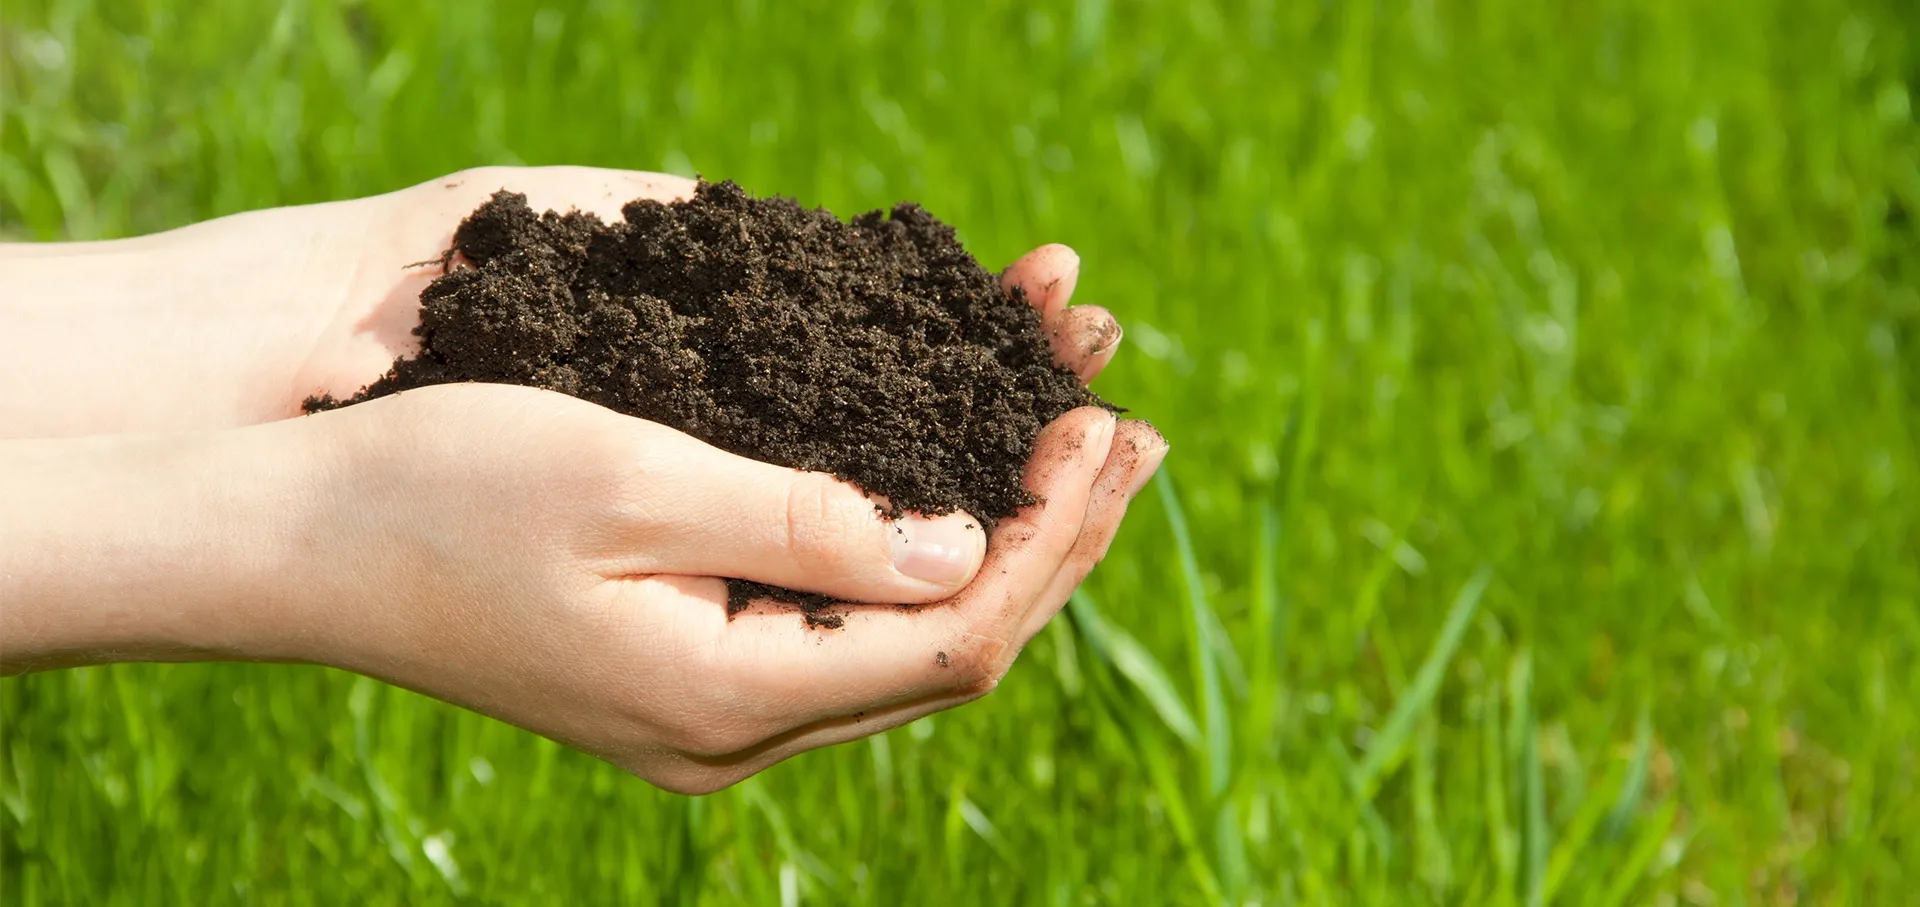 two hands cupped holding soil over grass